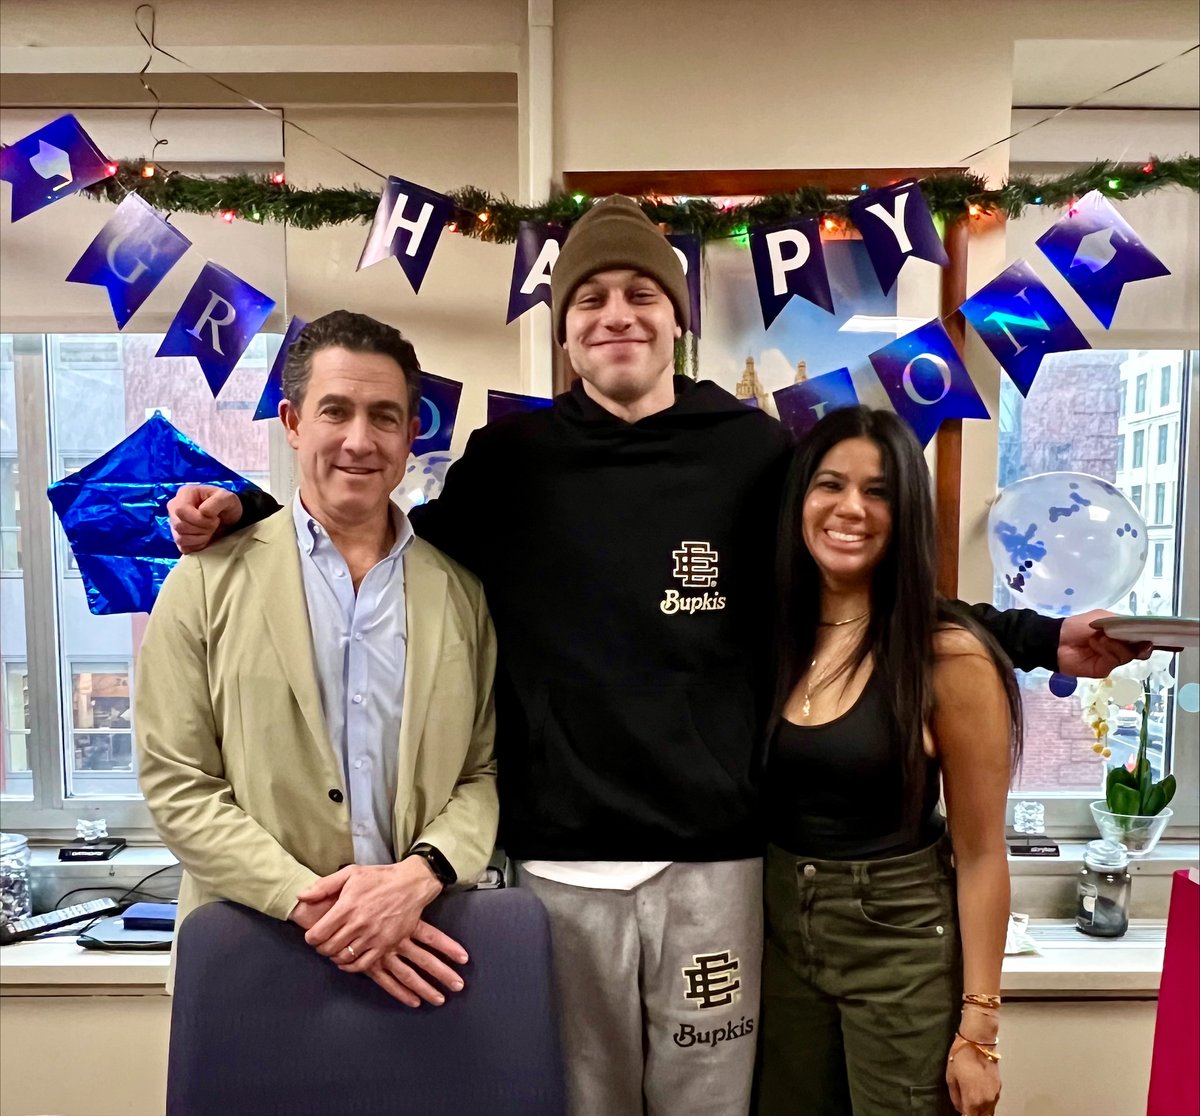 We're grateful to Pete Davidson, who donated $100K to the @lenoxhill Brain Tumor Center in support of their 10th Anniversary Gala! 🧠 With this support, we will continue to improve care and access to clinical trials for patients and raise funds to support research. @johnboockvar